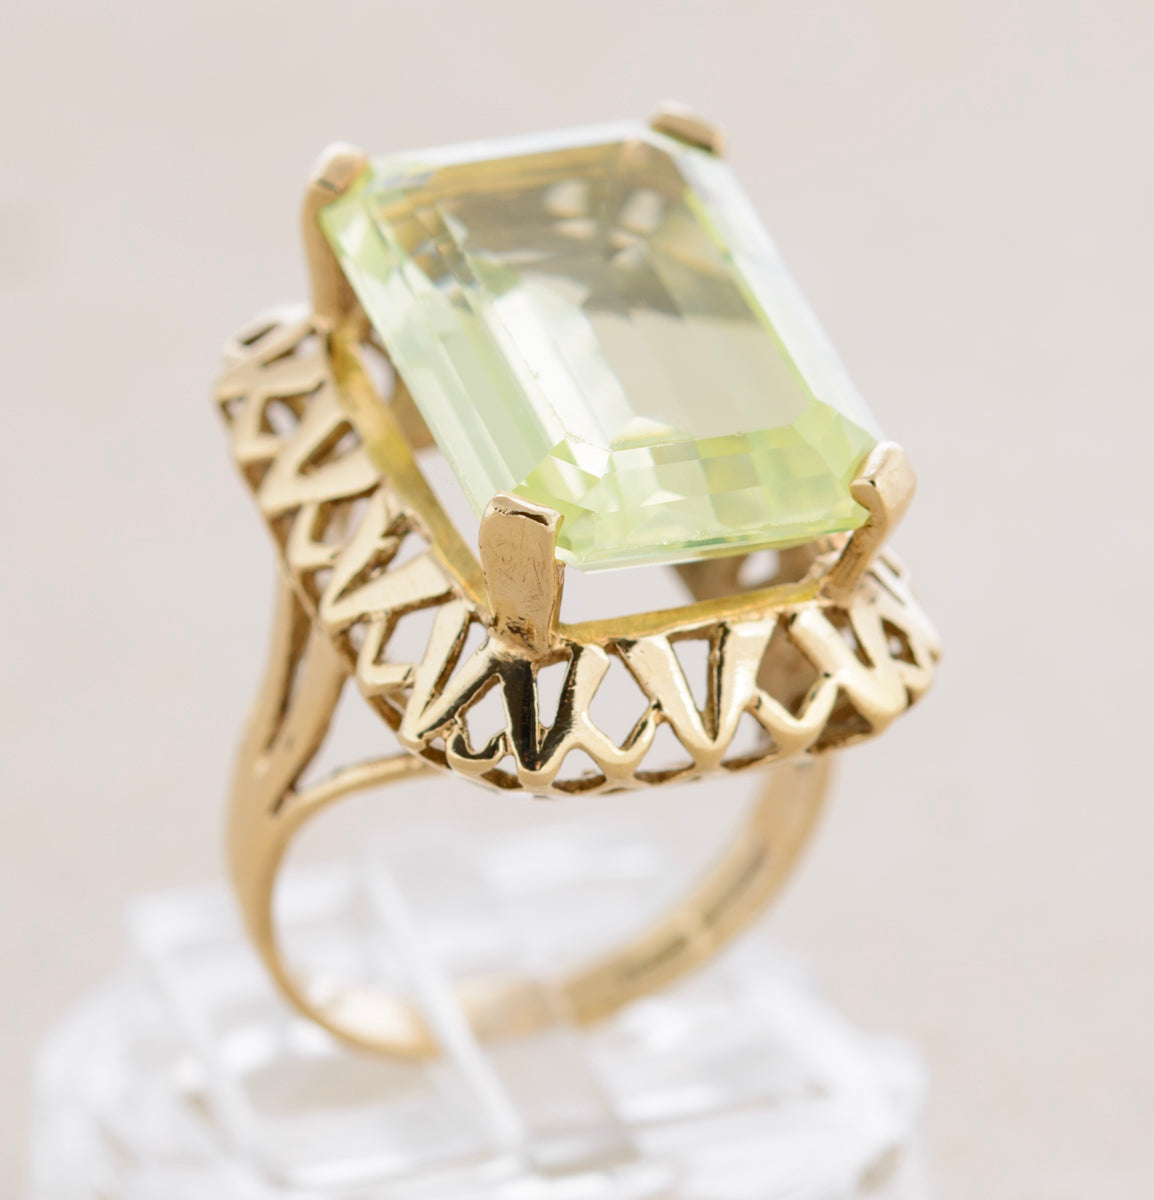 Vintage 9ct Gold Cocktail Ring Lab Created Spinel Gemstone Glows Under UV (A1760)